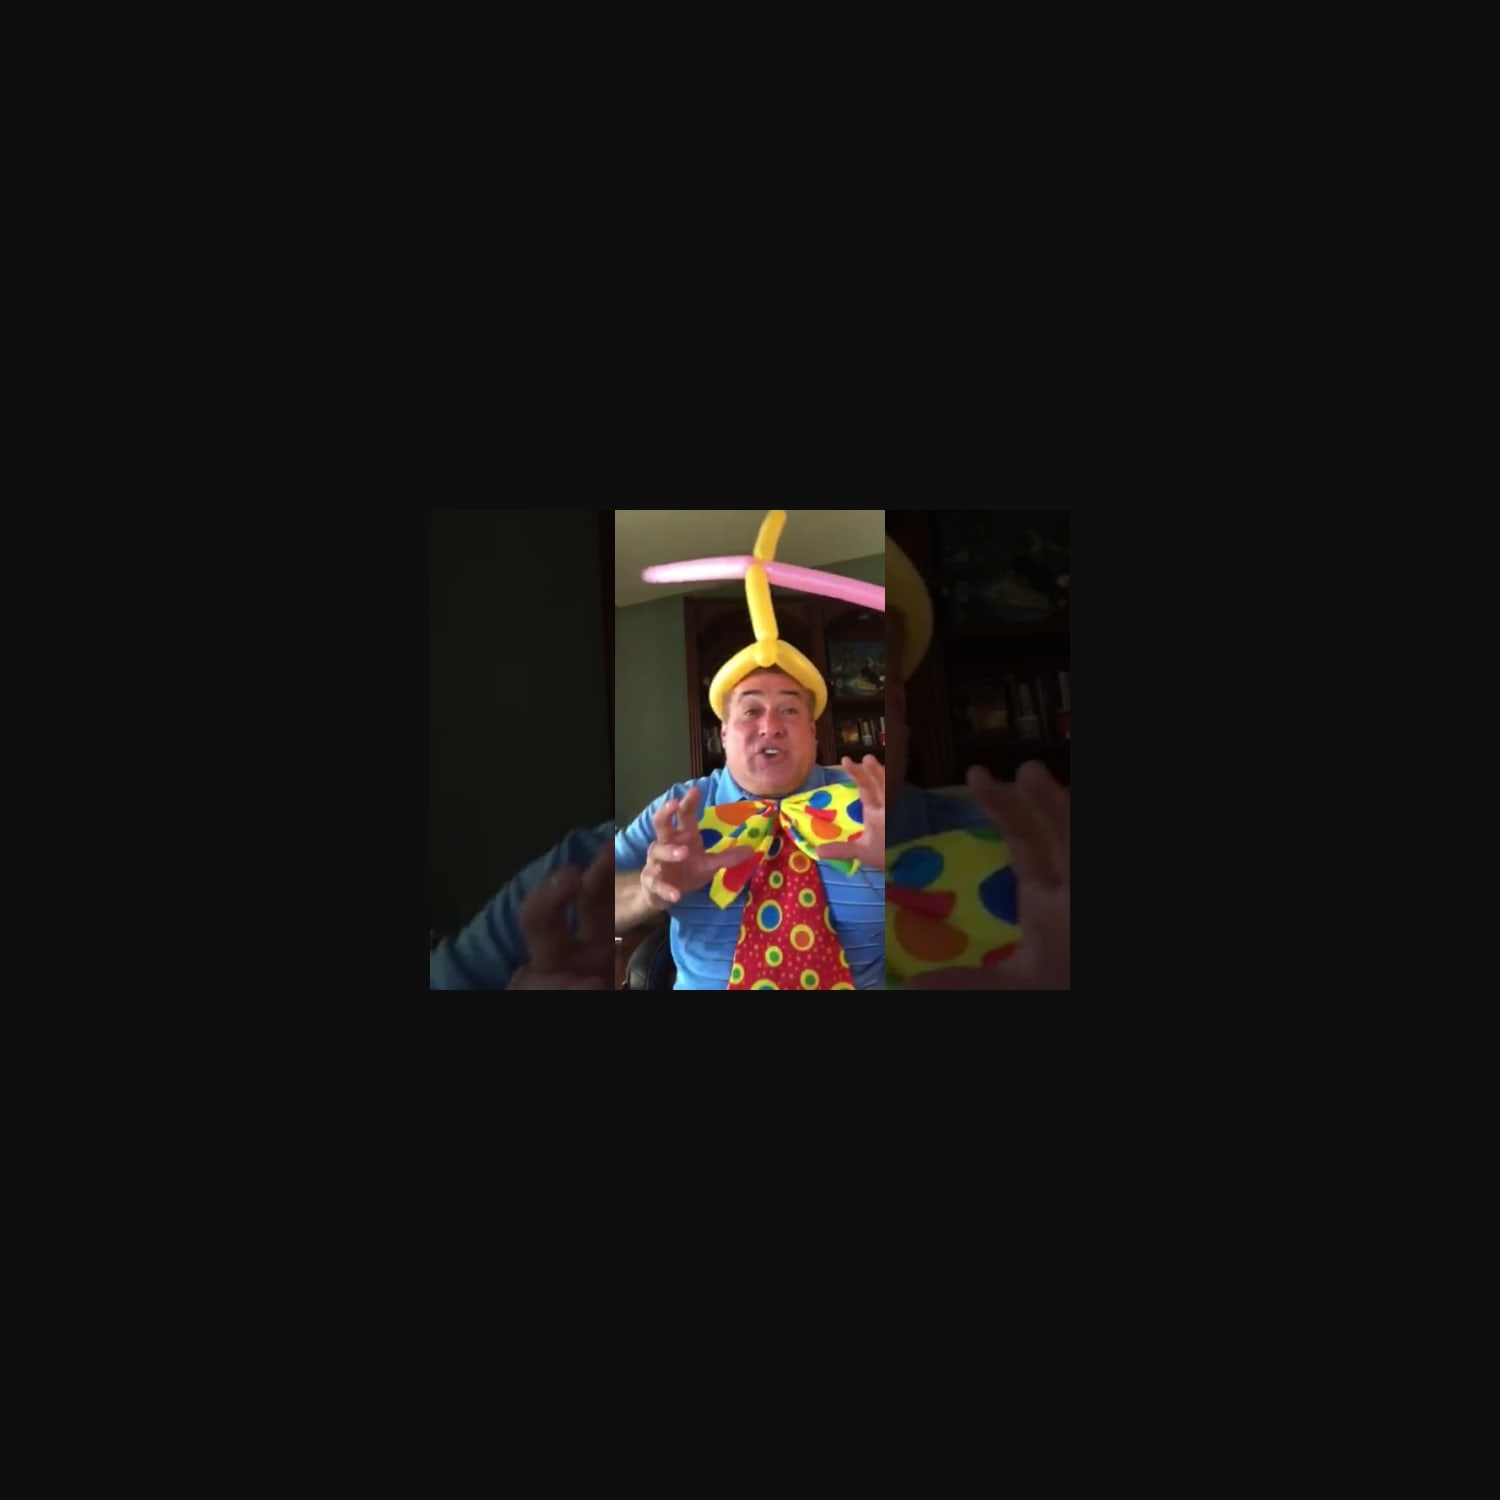 "GOOD GOD!..God is GOOD!" Man in ridiculous balloon hat and clown tie sings poorly and then talk about God. The rare video with zero views before I watched it. 3 years old.